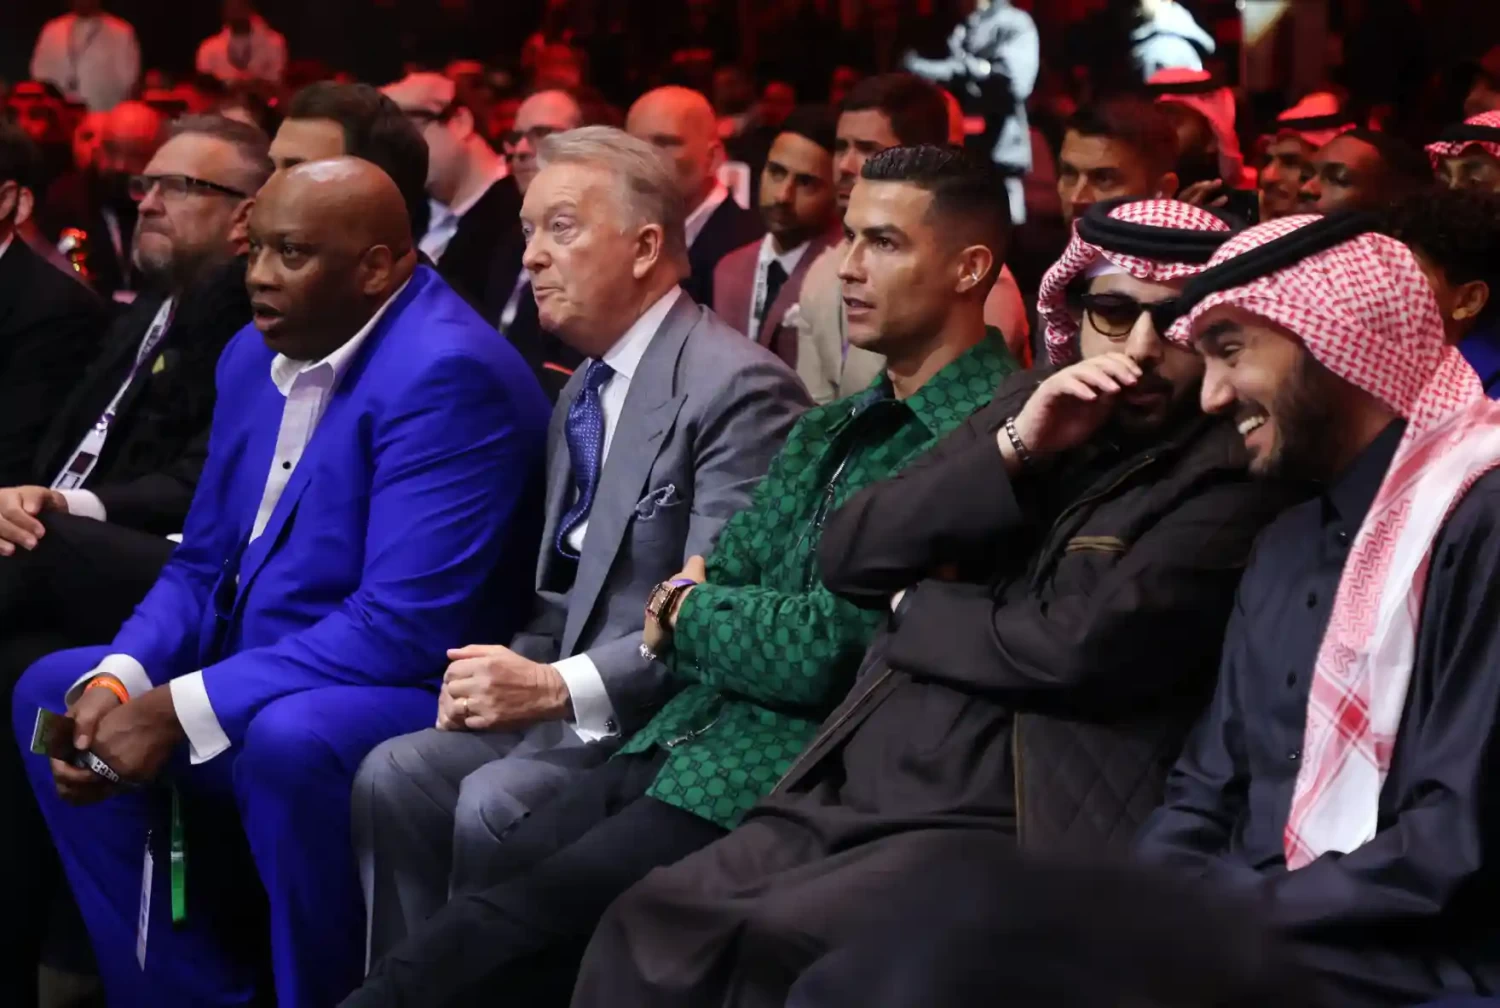 Frank Warren, Cristiano Ronaldo and Turki Alalshikh were among those taking in Saturday’s fights from ringside. Photograph: Ahmed Yosri/Reuters